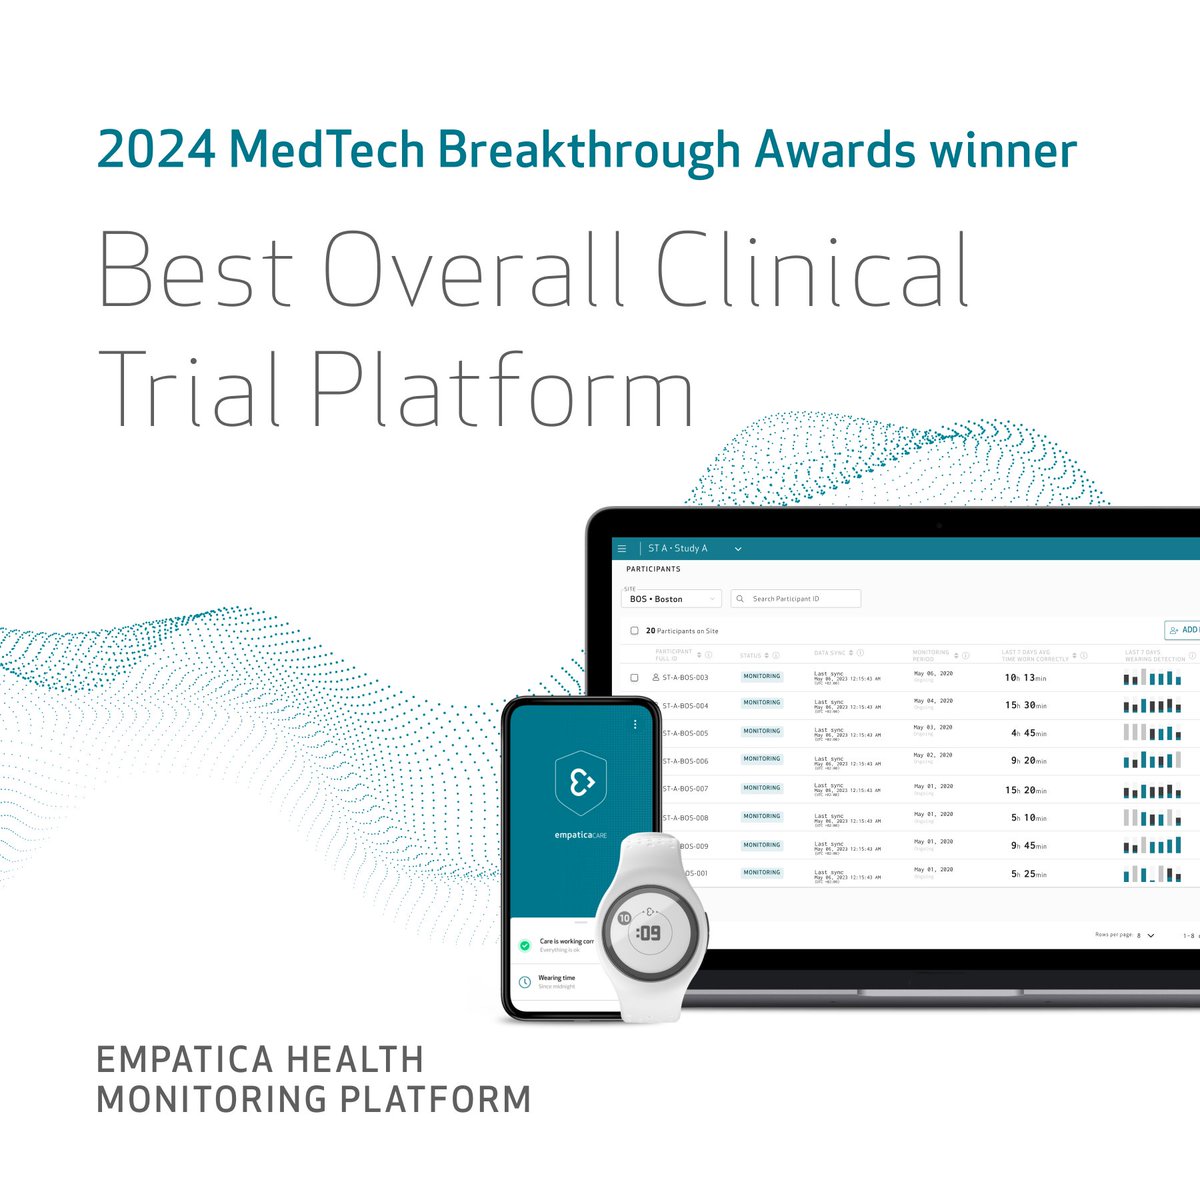 🏆 We’re thrilled to announce that Empatica has been selected as a winner in the 2024 #MedTech Breakthrough Awards program, taking home the “Best Overall Clinical Trial Platform” award! ⌚💻The Empatica Health Monitoring Platform is FDA-cleared, and consists of the medical-grade